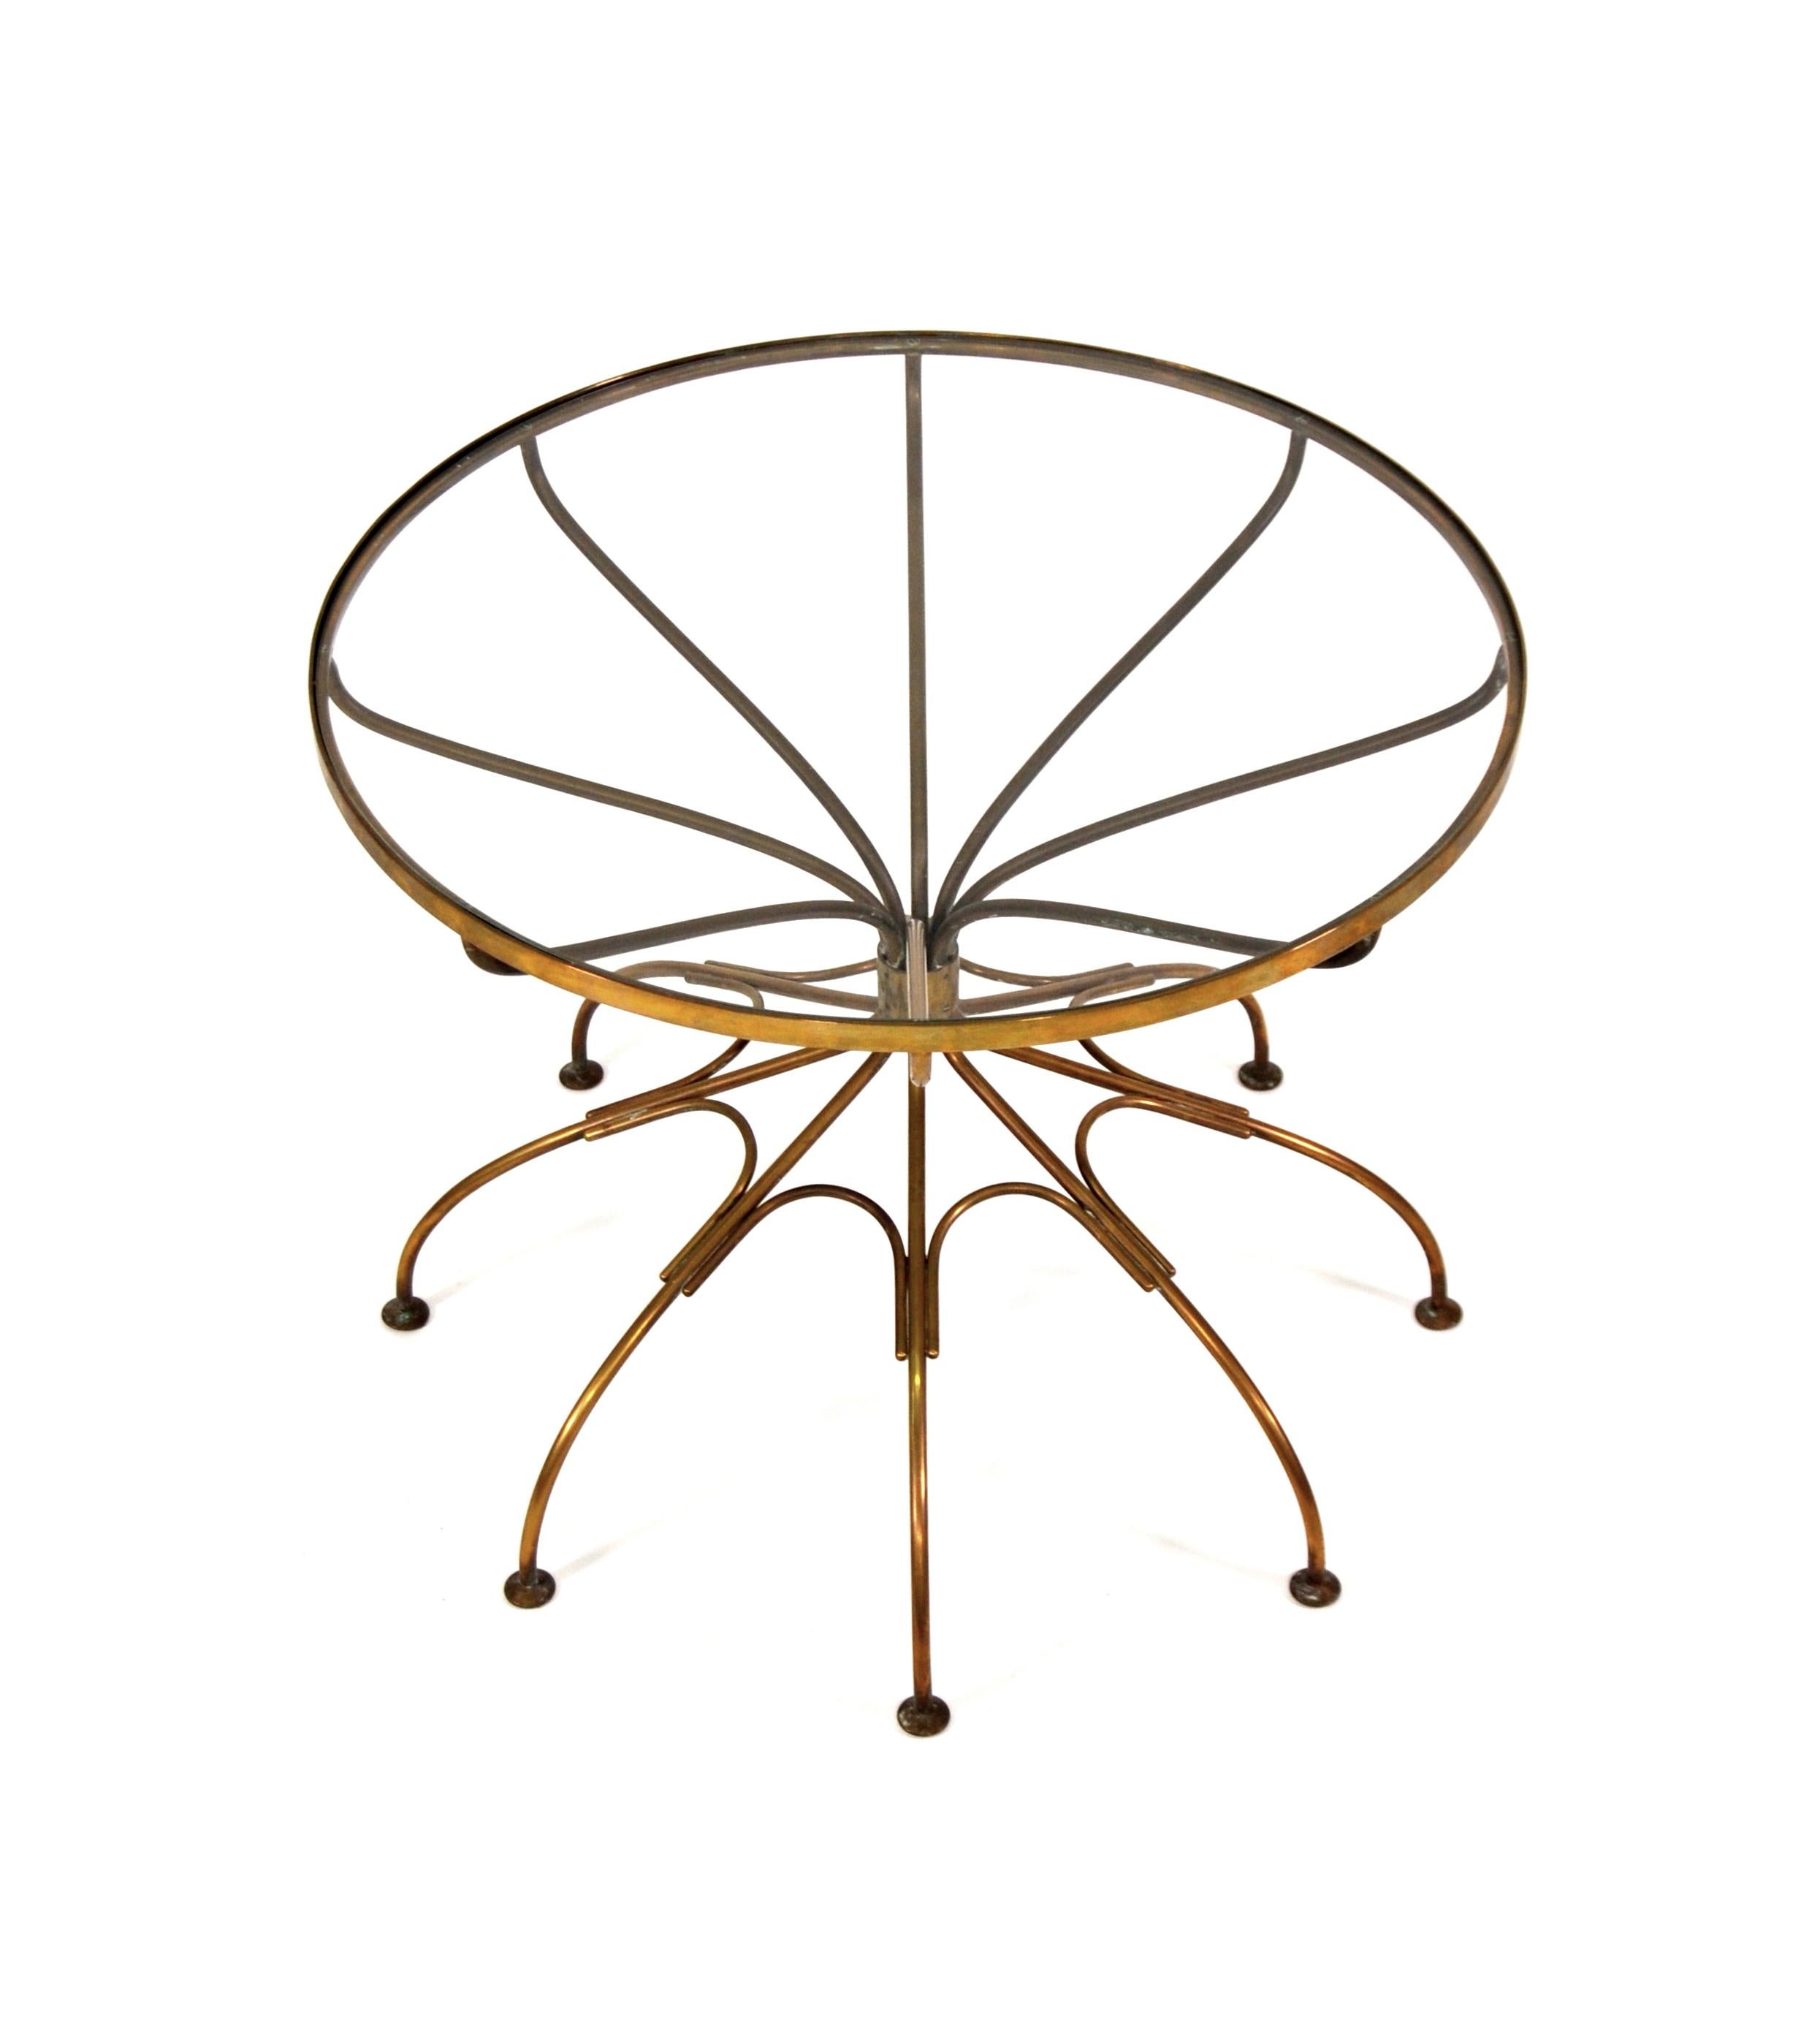 A whimsical vintage brass occasional table with a round, inset glass top, dating from the 1950s. The table features a solid brass frame shaped like a spider or the frame of an umbrella. A very unusual end table that can work well in many decors,